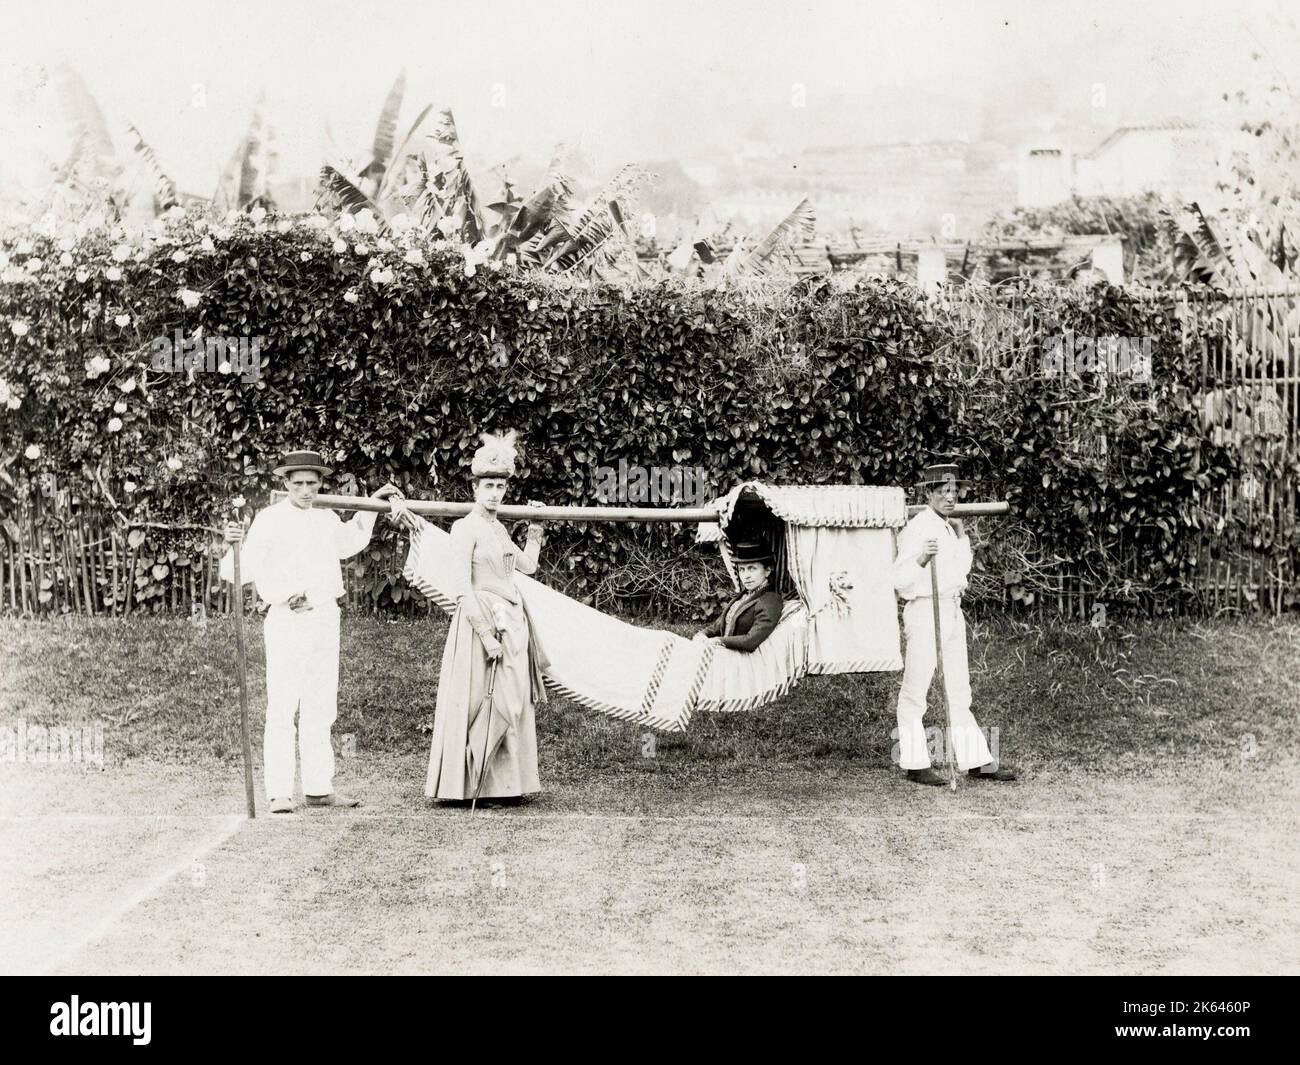 Vintage 19th century photograph - woman being carrried in a hammock, carrying chair, probably Madeira or Canary Islands. Stock Photo